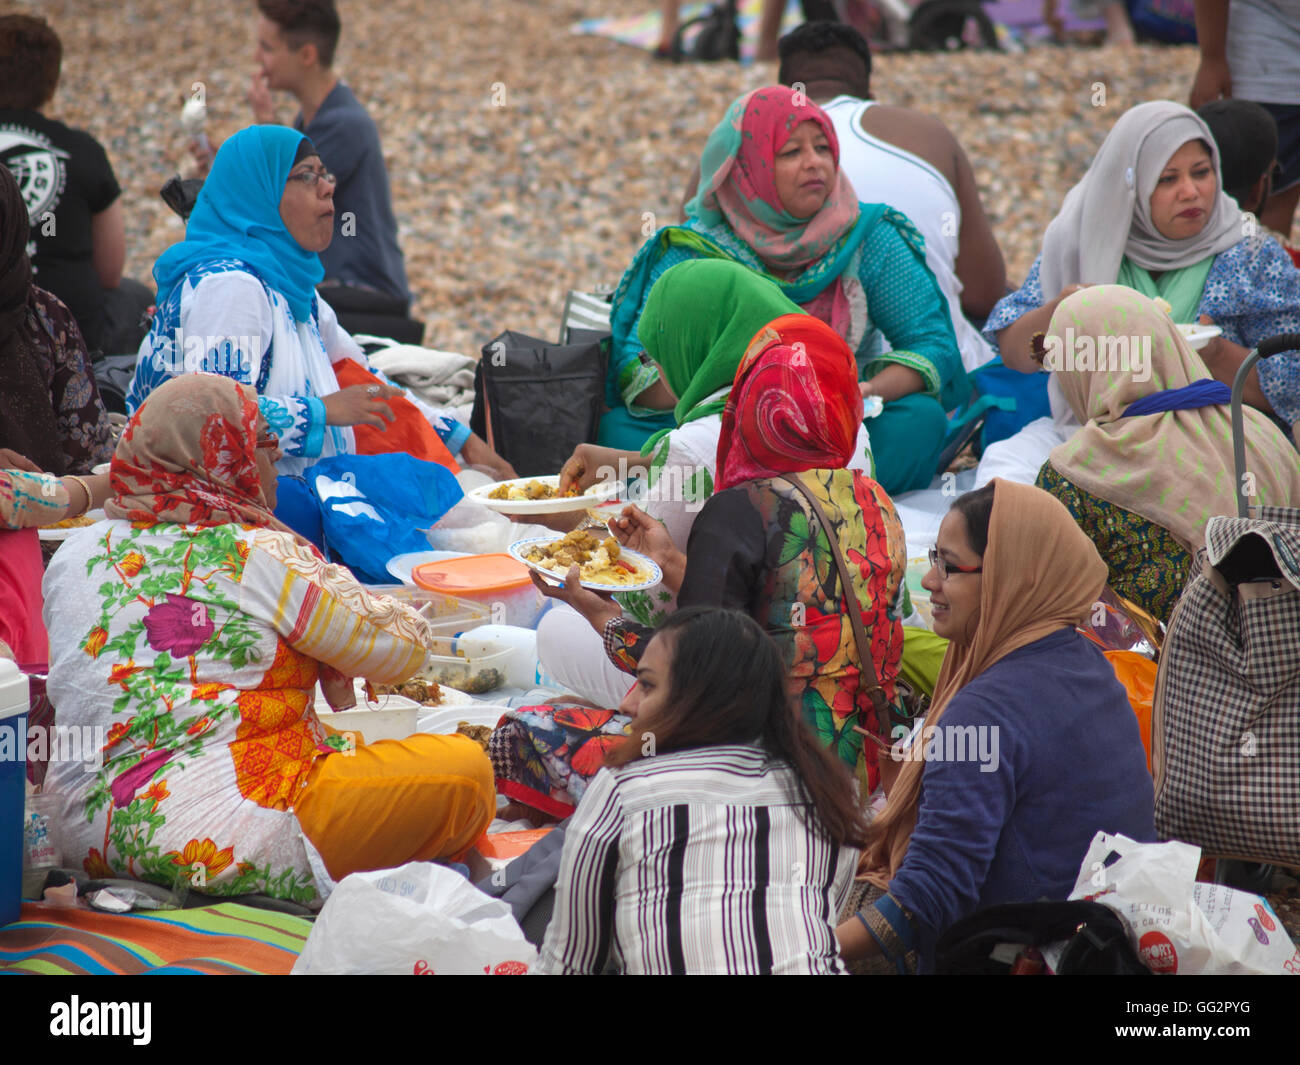 A group of Muslim women enjoy a picnic on the beach in Brighton Stock Photo